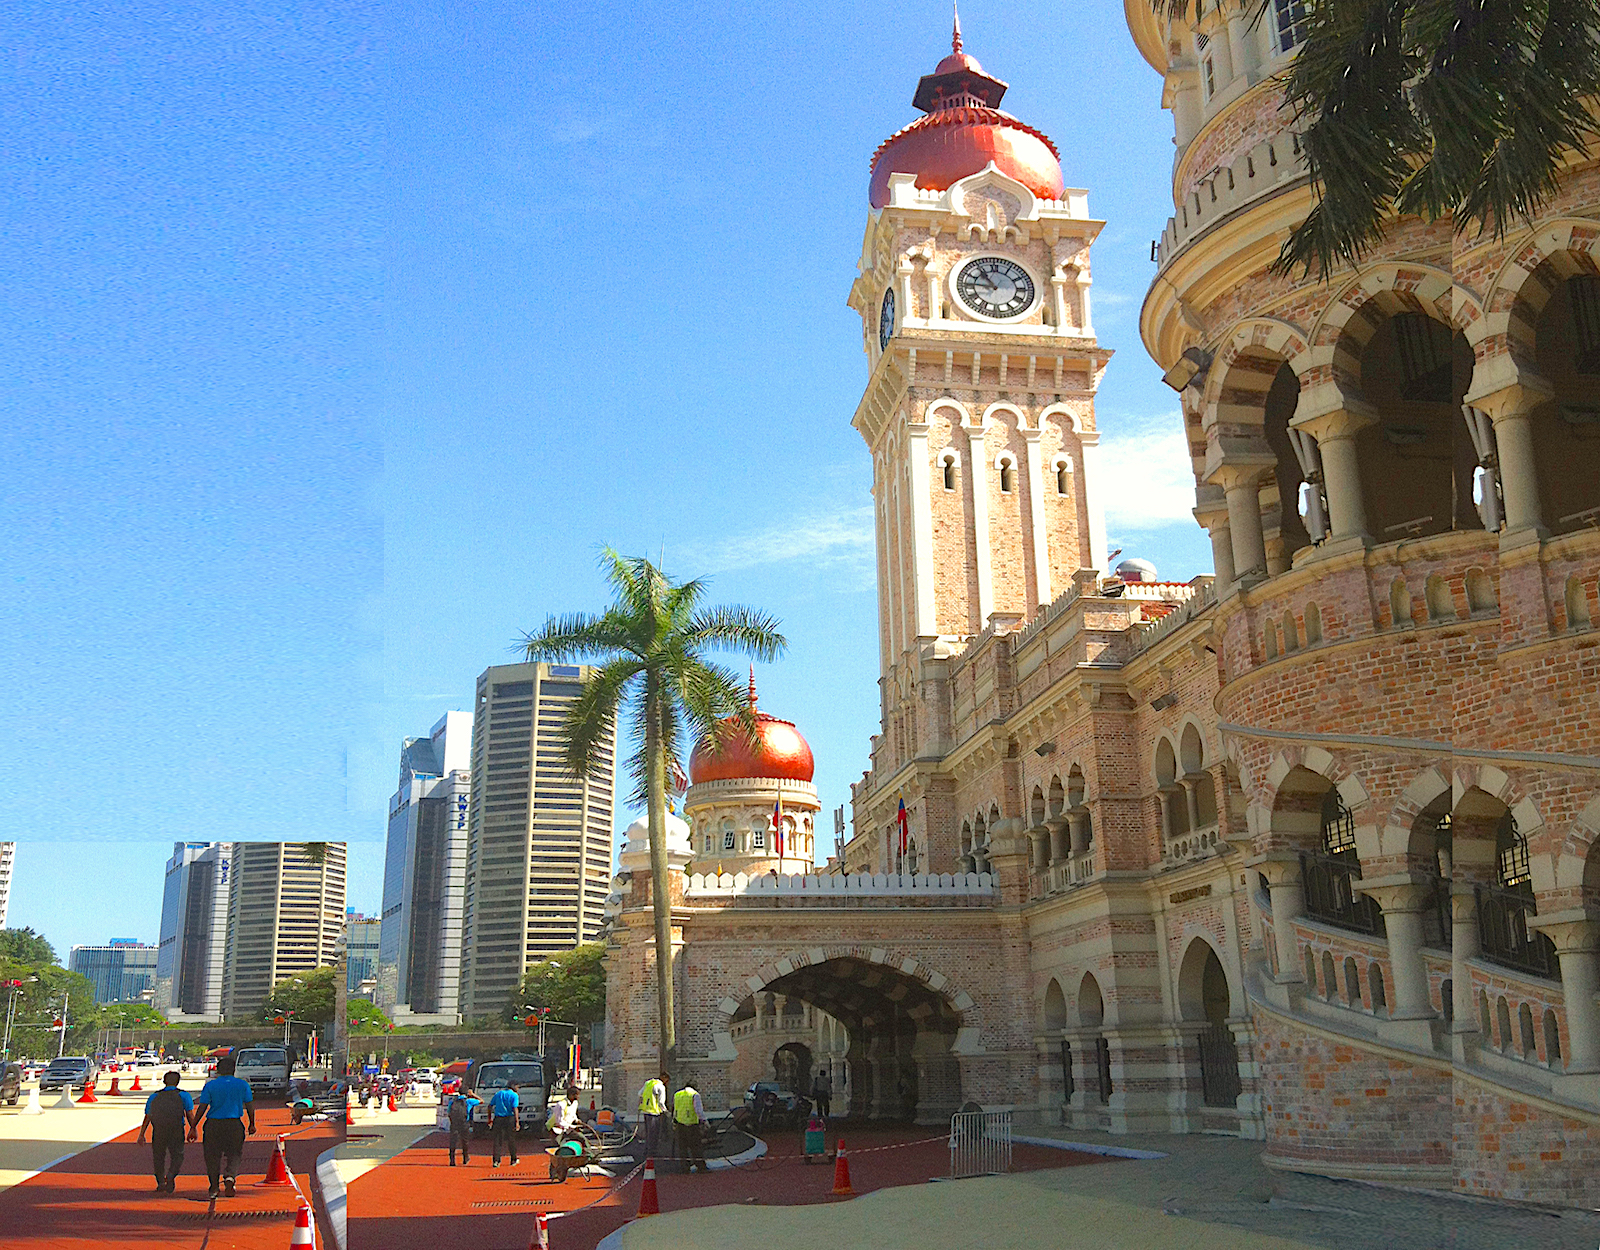 The "Sultan Abdul Samad" Building once housed the British colonial government